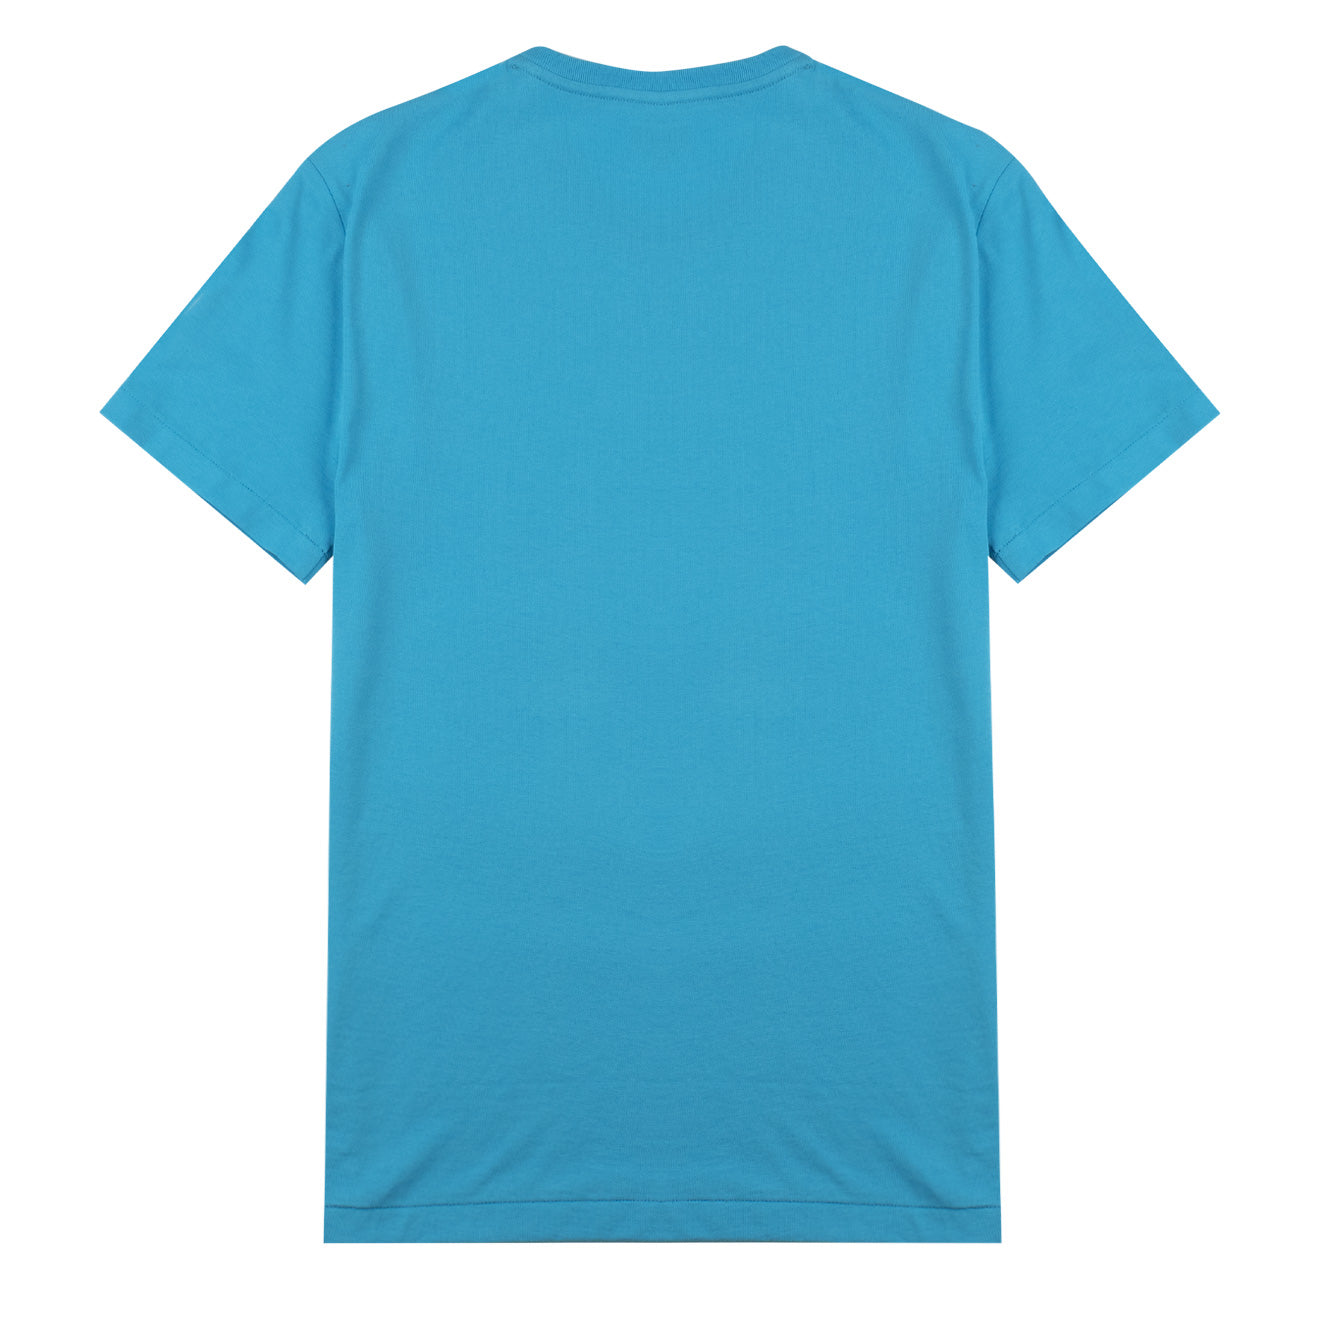 Polo Ralph Lauren Slim Fit S/S T-Shirt Cove Blue | The Sporting Lodge